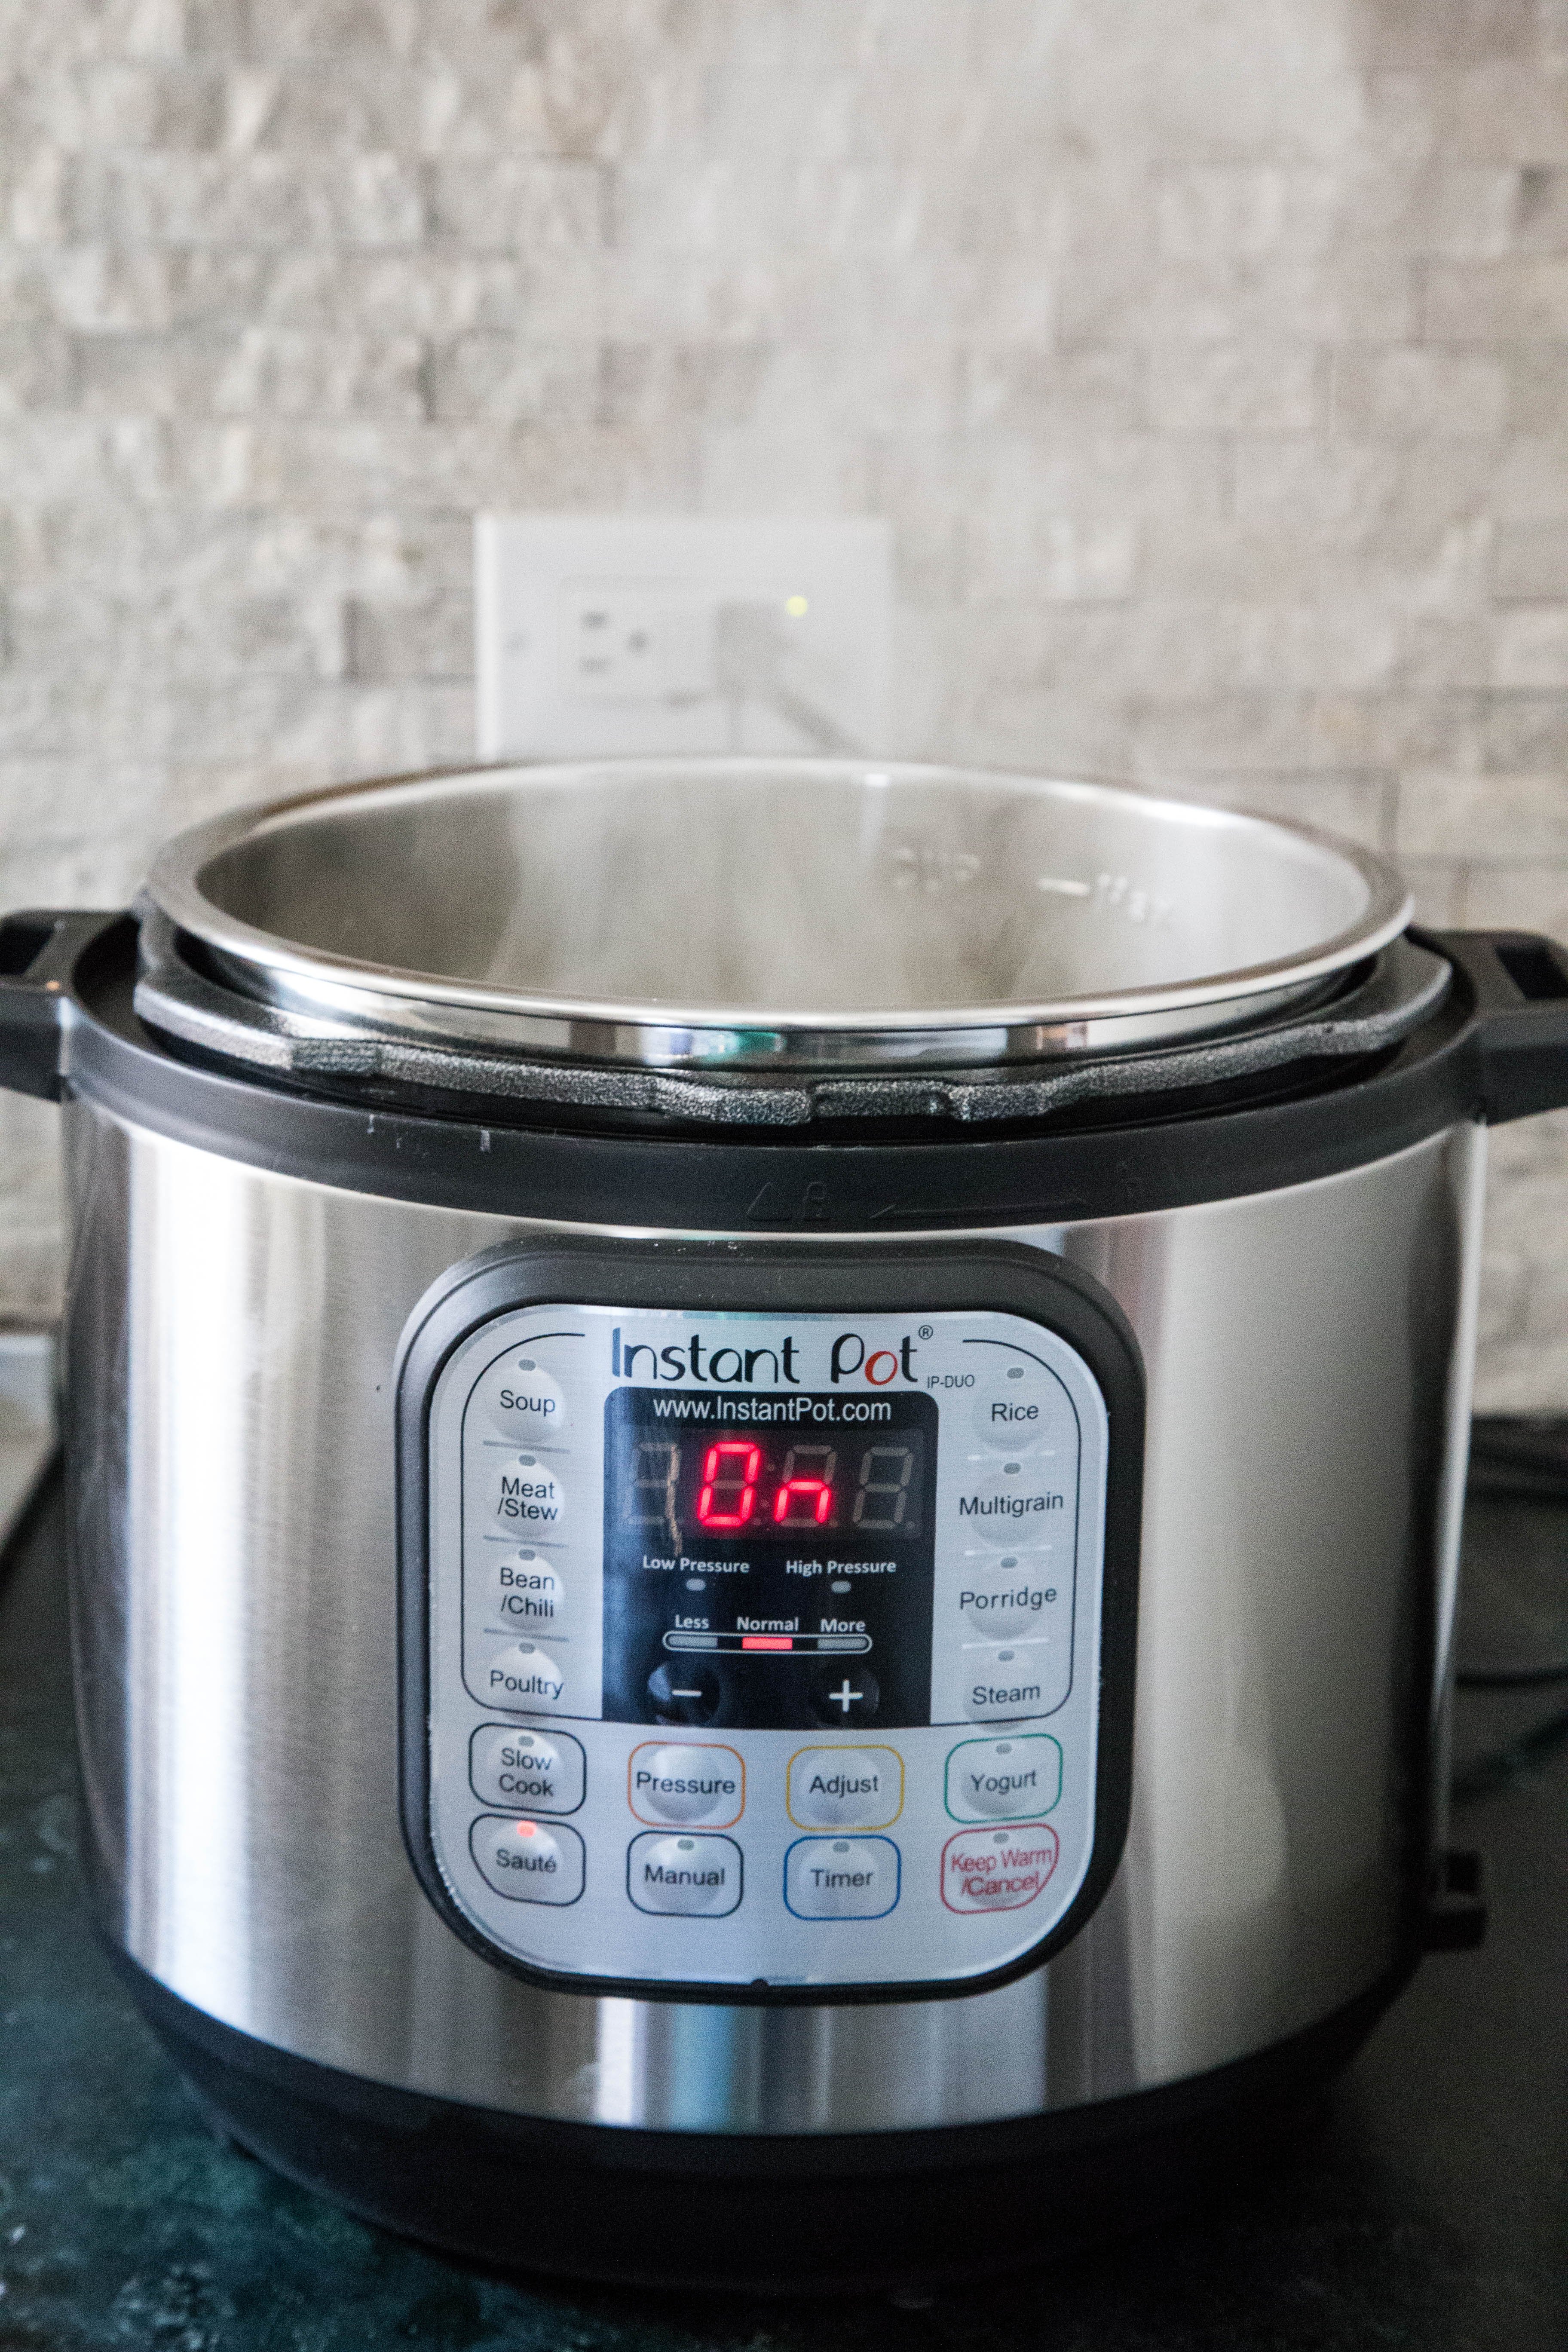 Crock Pot, Slow Cooker, Pressure Cooker and Instant Pot (What's